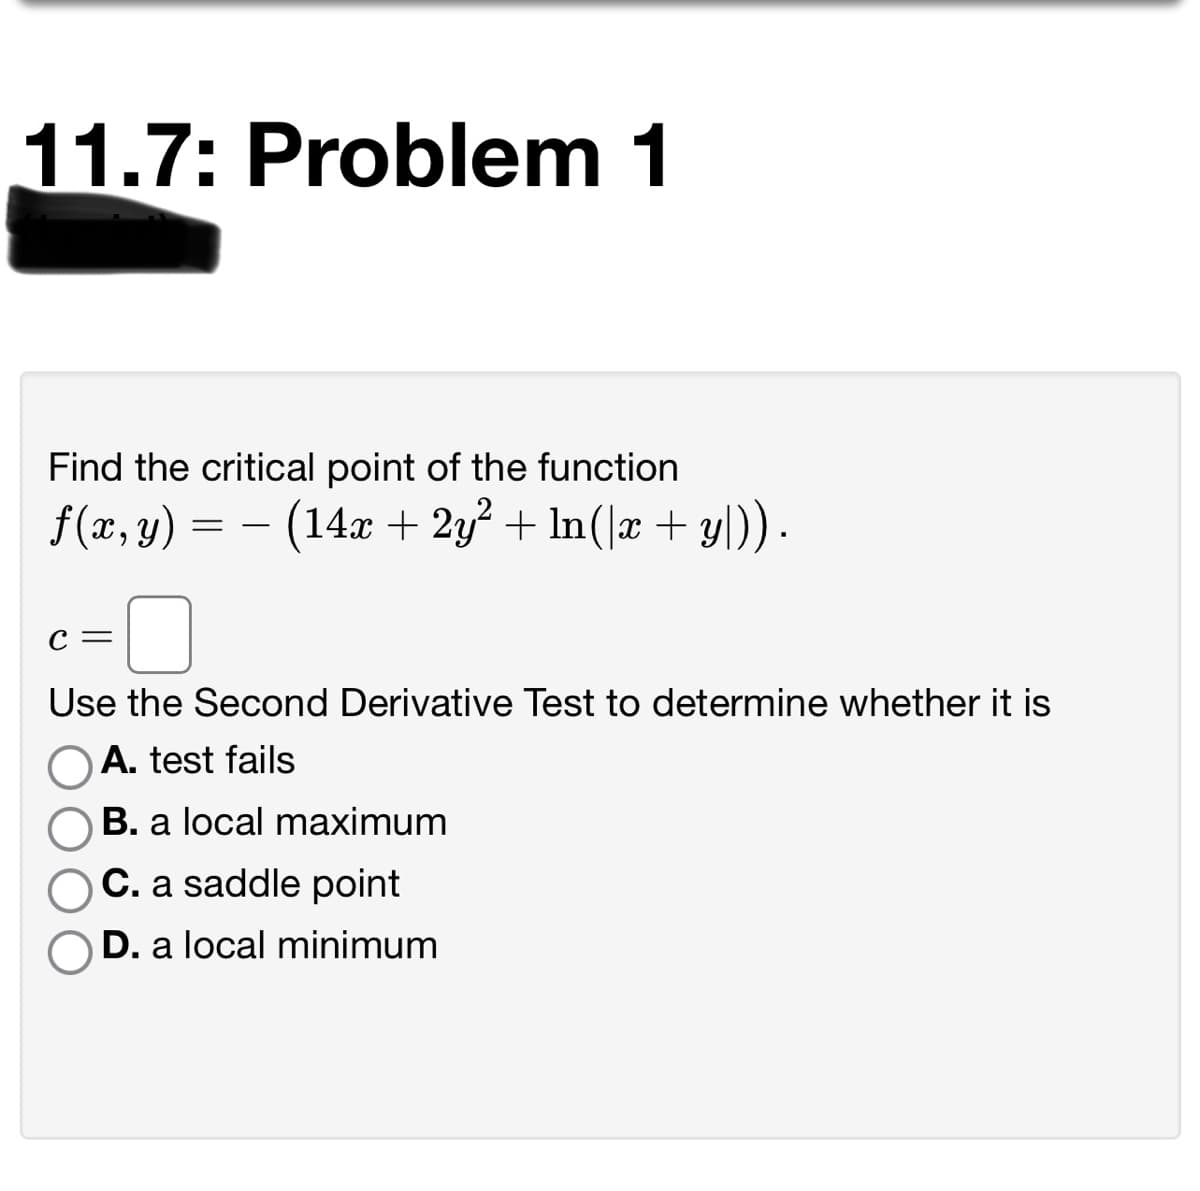 11.7: Problem 1
Find the critical point of the function
f (x, y) = – (14x + 2y² + ln(|x + yl)) .
С —
Use the Second Derivative Test to determine whether it is
O A. test fails
B. a local maximum
C. a saddle point
D. a local minimum
